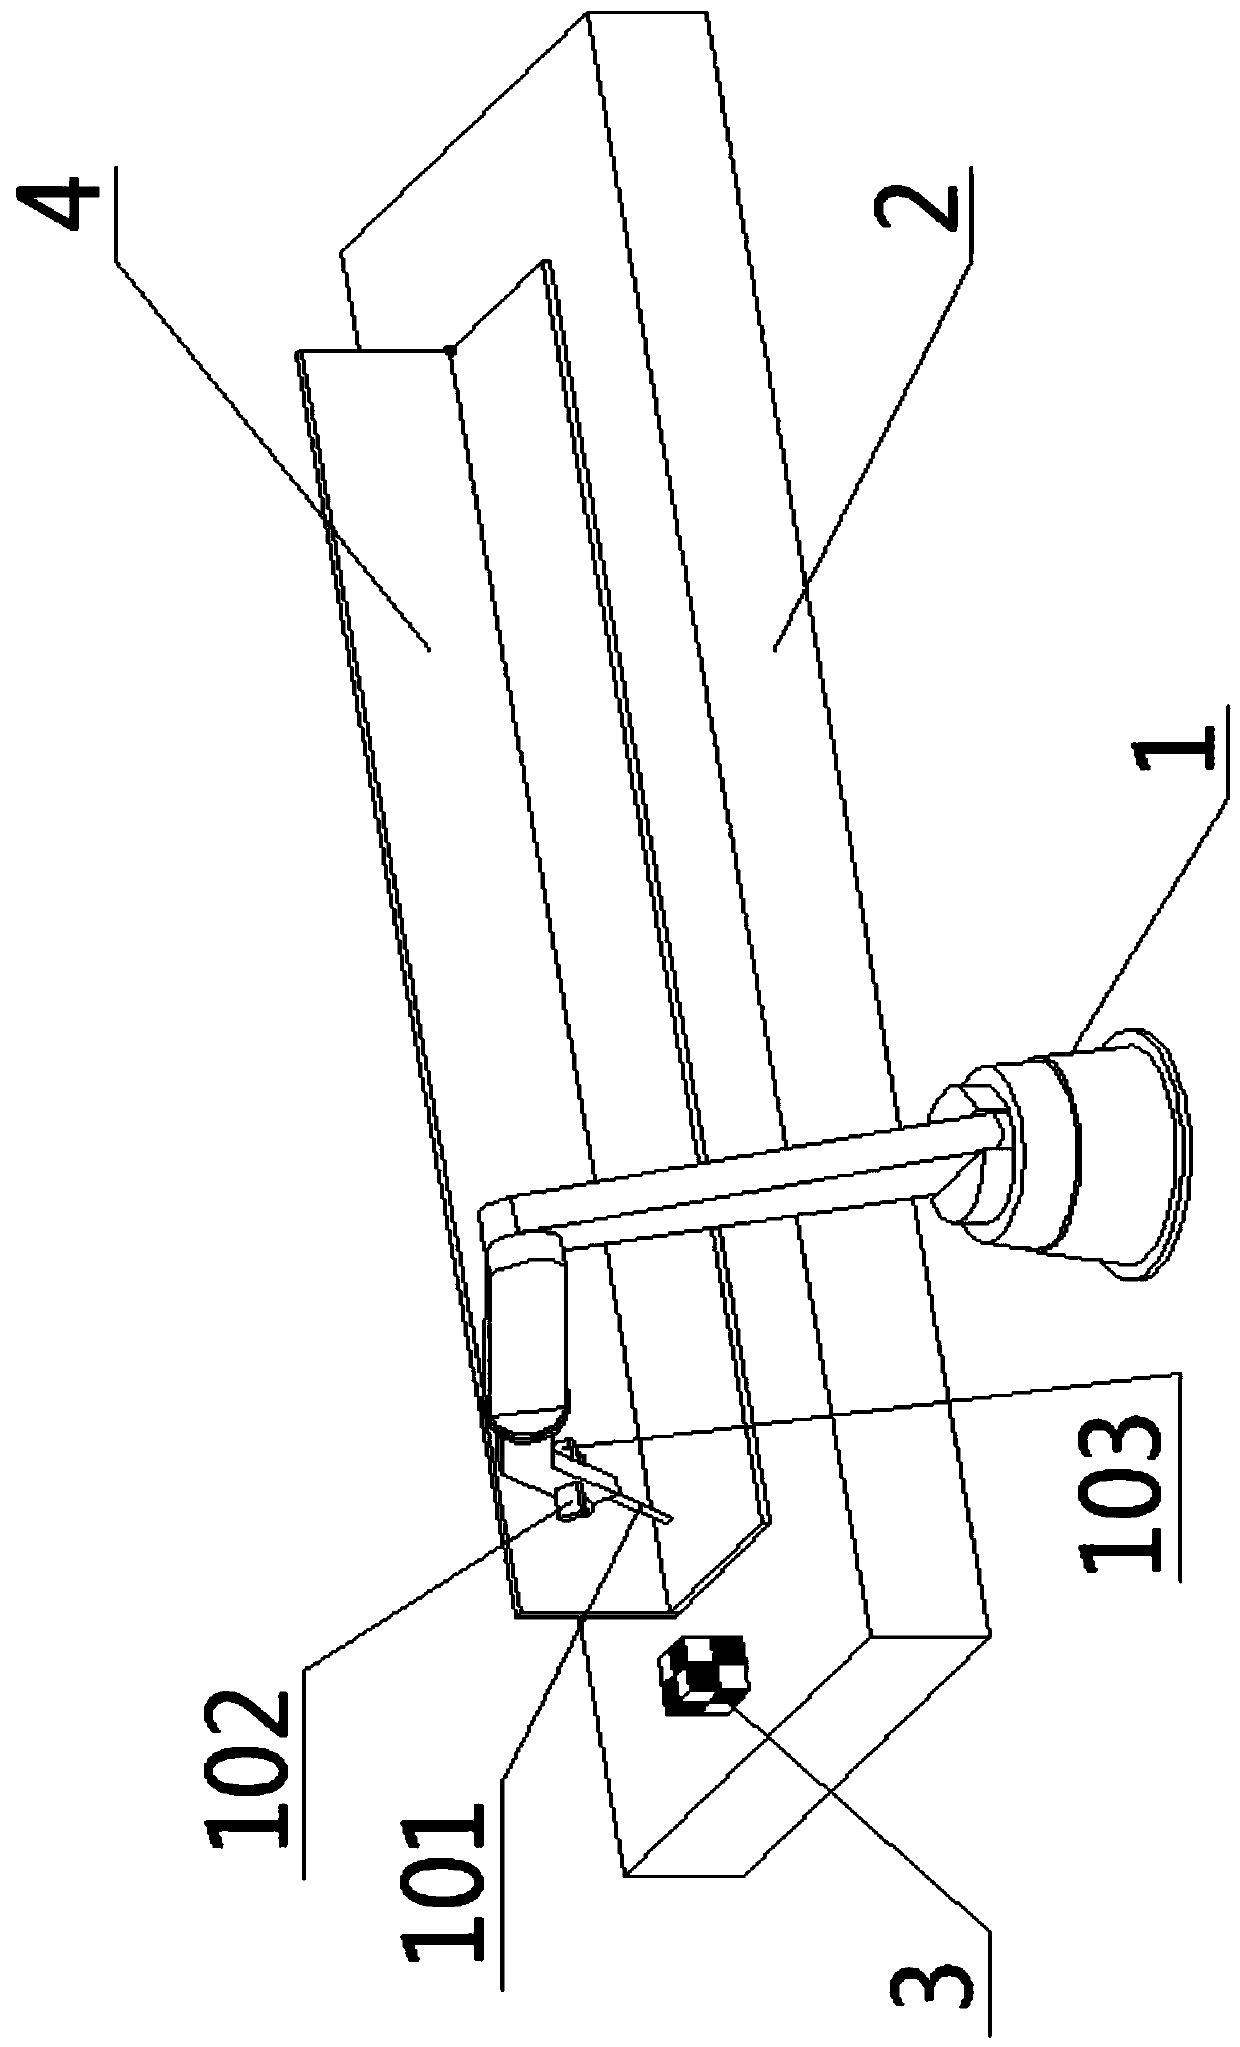 Robot welding device and method for acquiring welding seam track